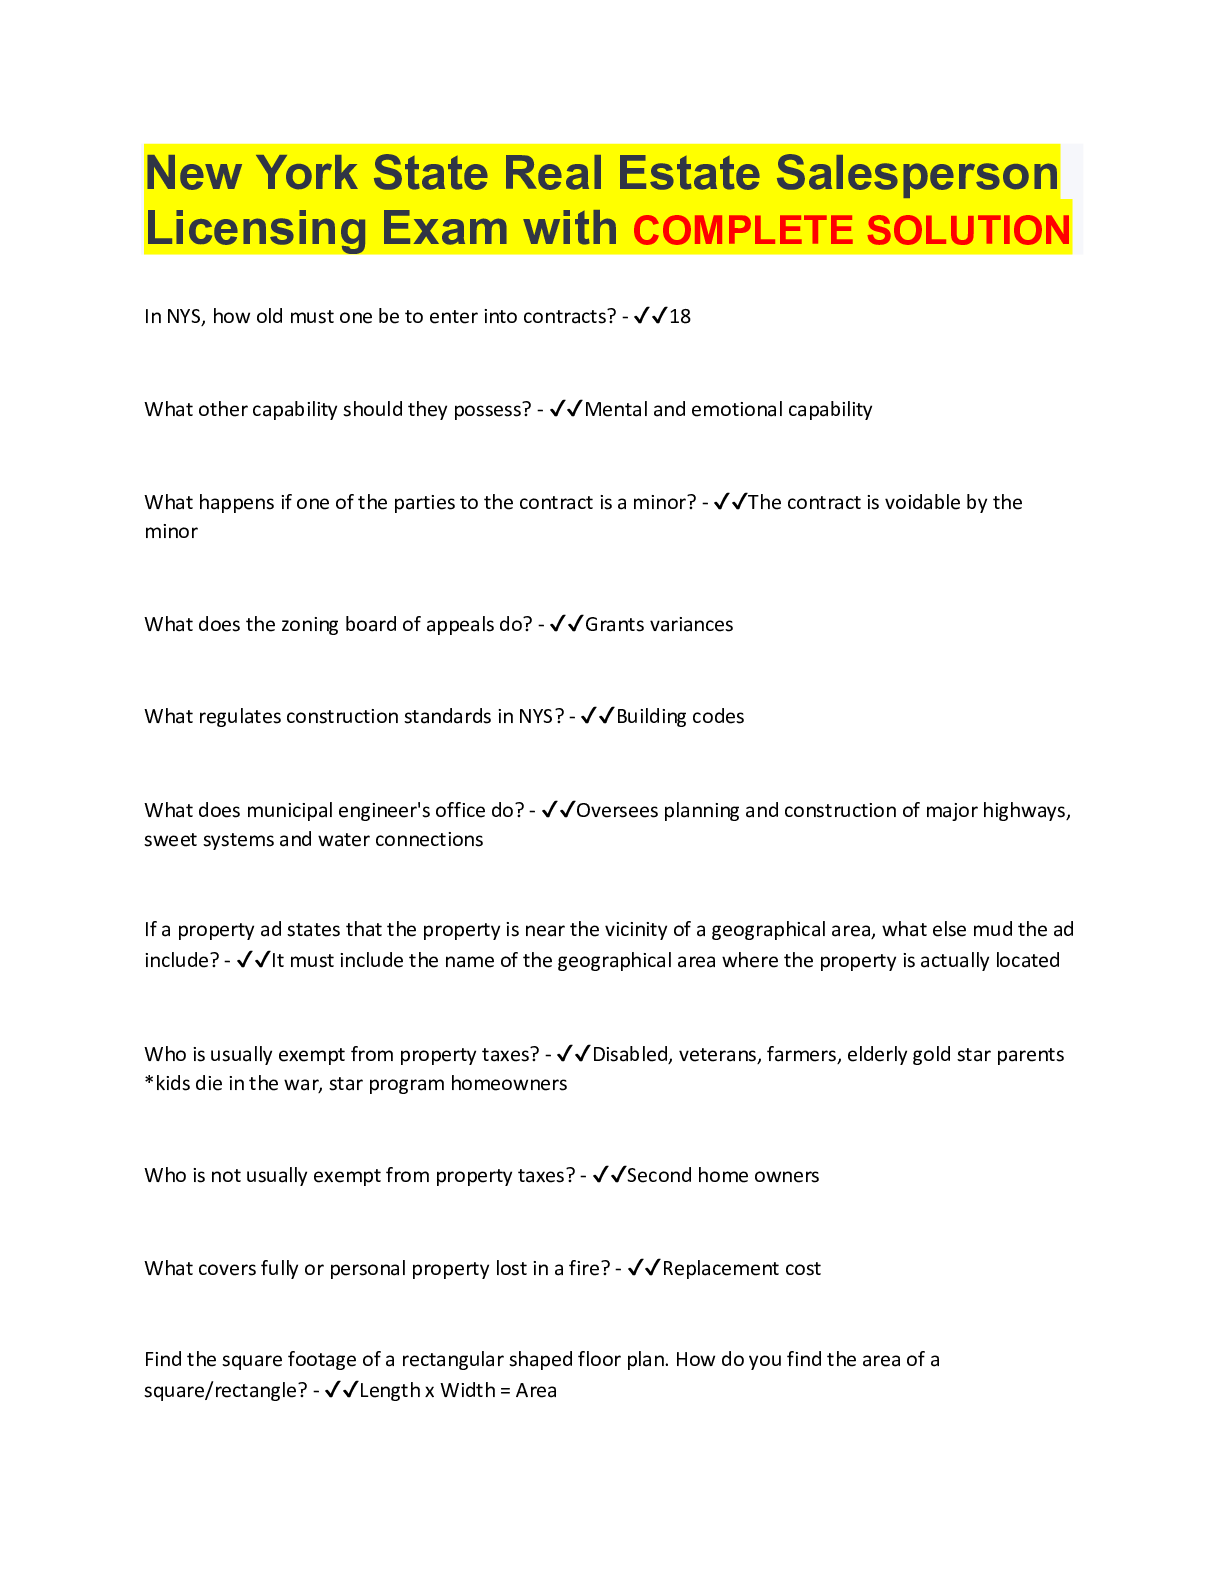 New York State Real Estate Salesperson Licensing Exam 2022 With Complete Solution Browsegrades 